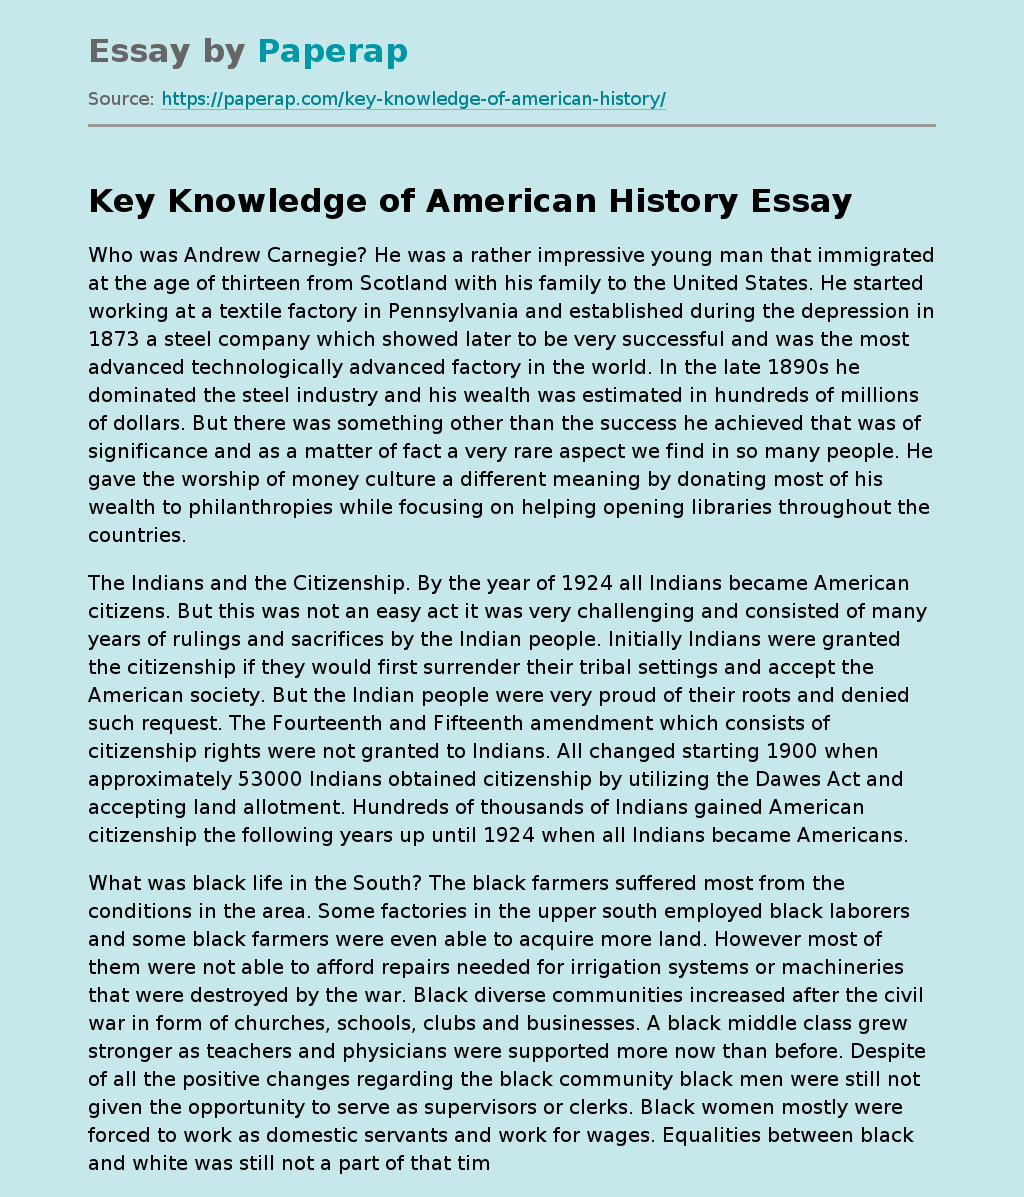 Key Knowledge of American History